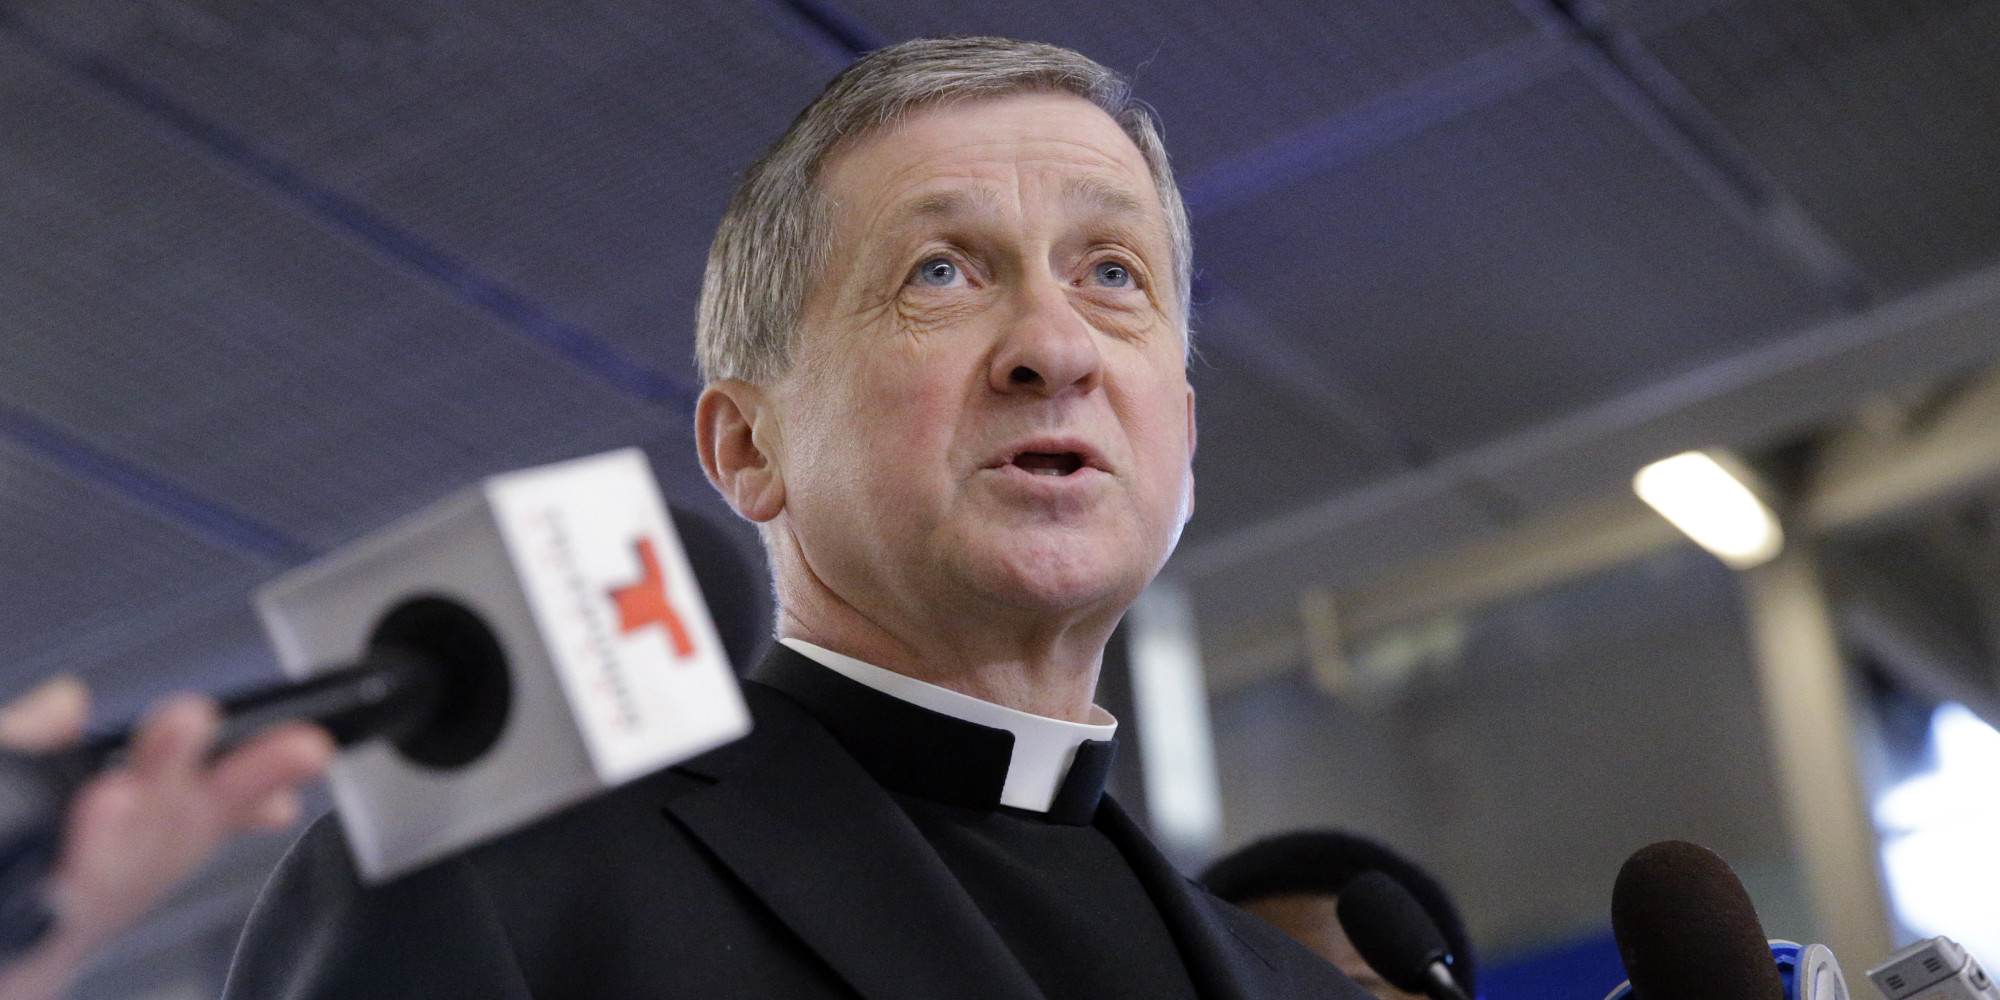 Chicago's Archbishop Cupich Says Will Not Deny Pro-Choice Politicians Communion